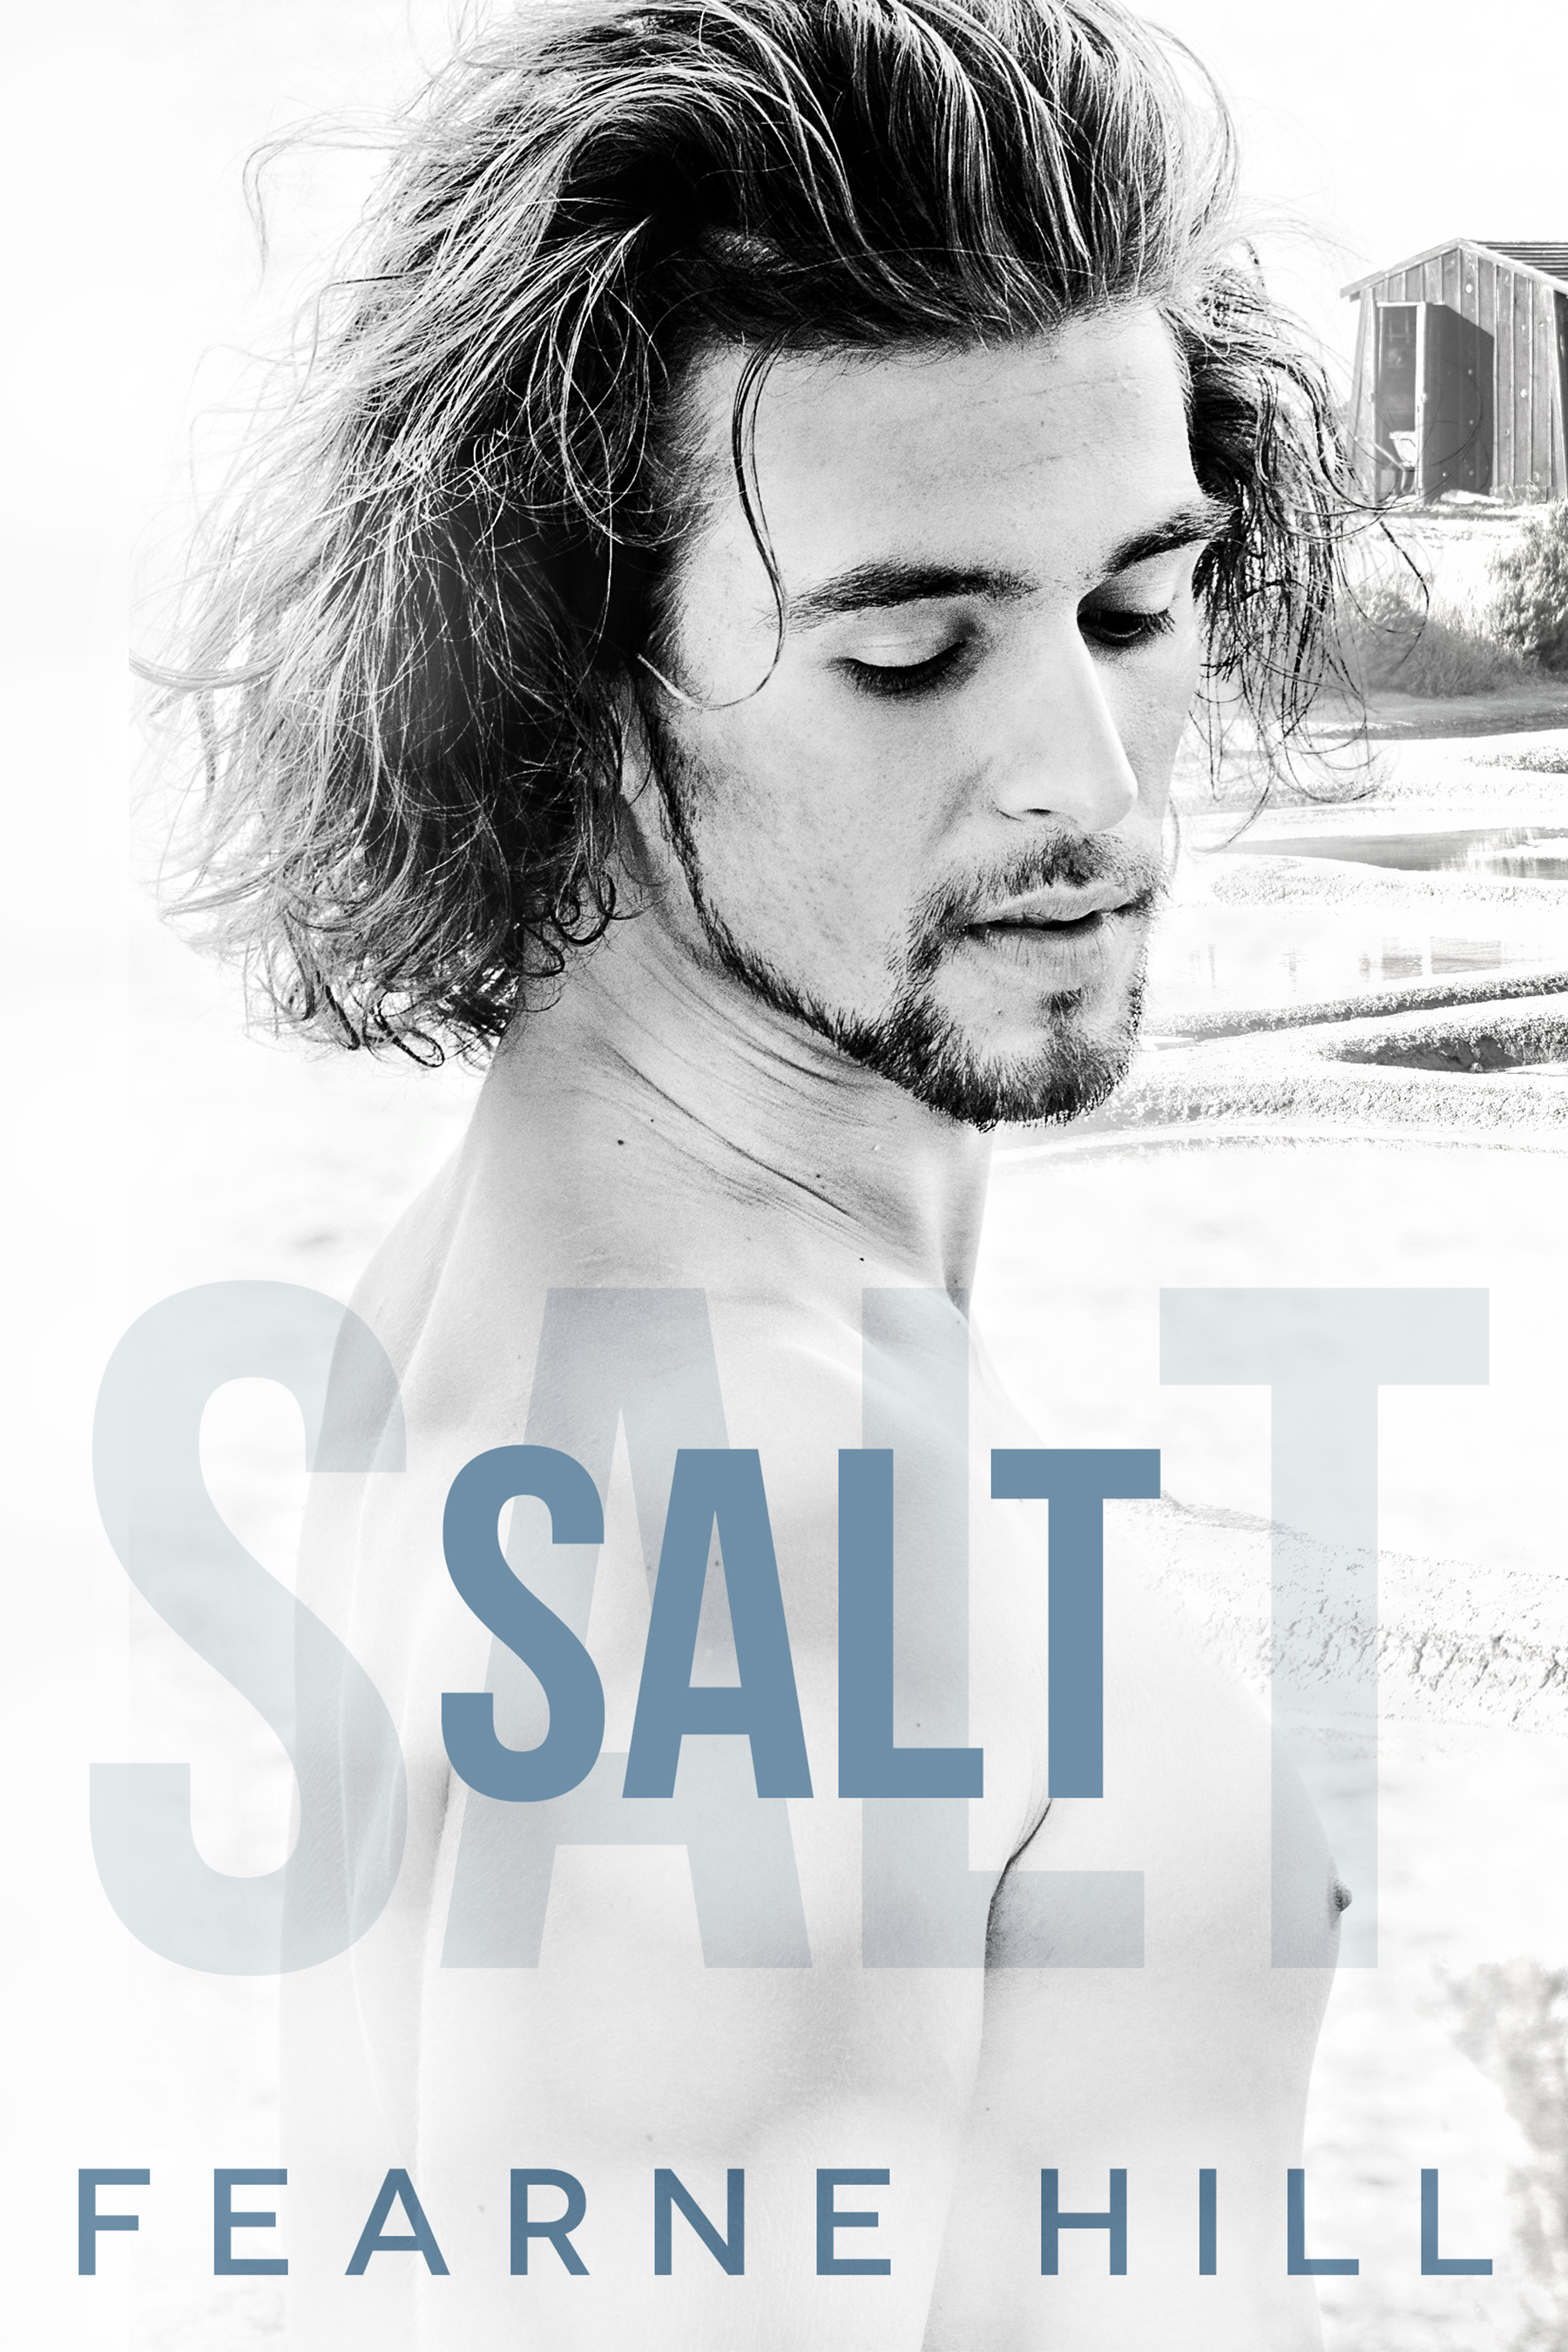 A man with curly hair and a beard is on the cover of a book titled salt by fearne hill.